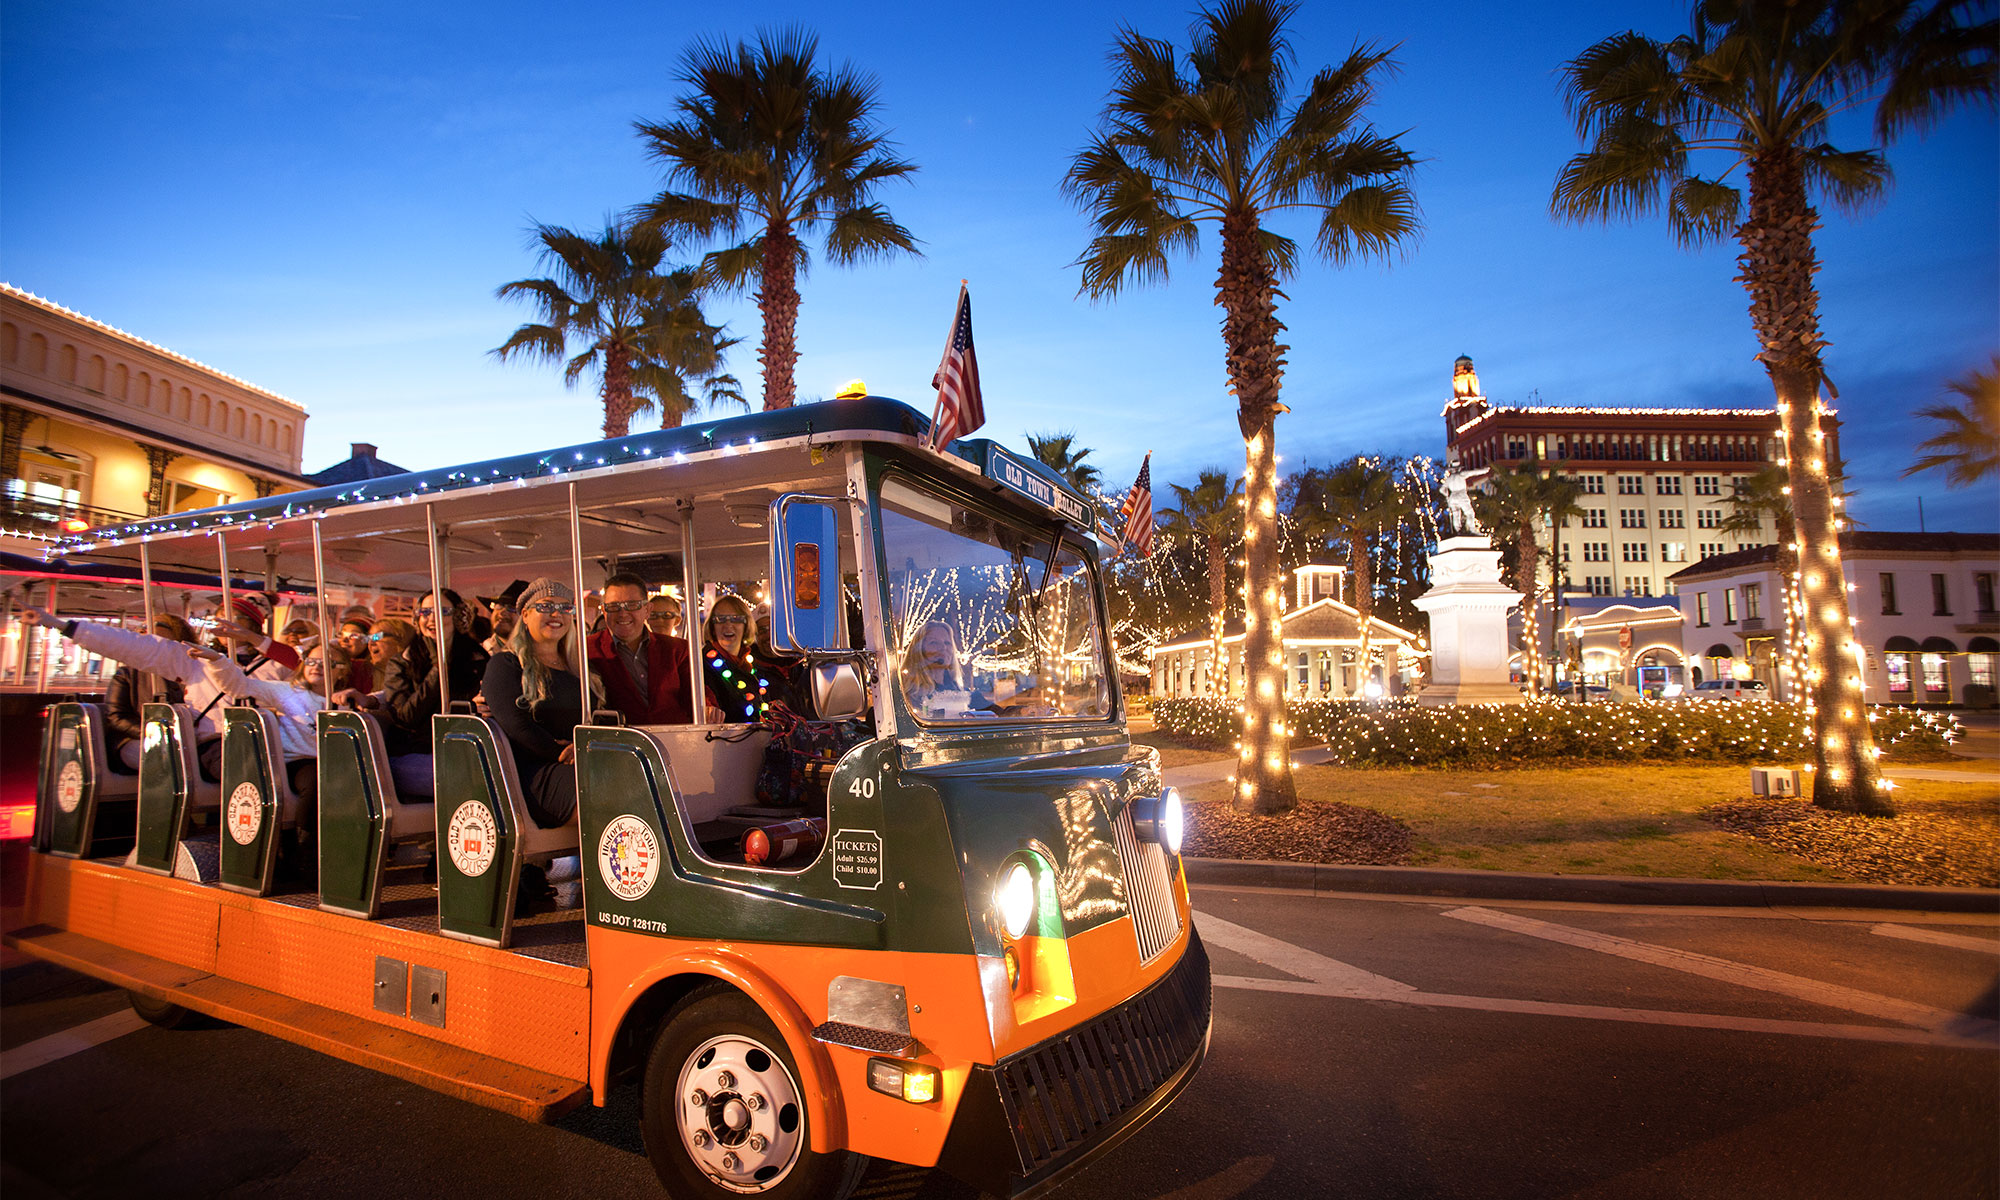 st augustine trolley tour hours